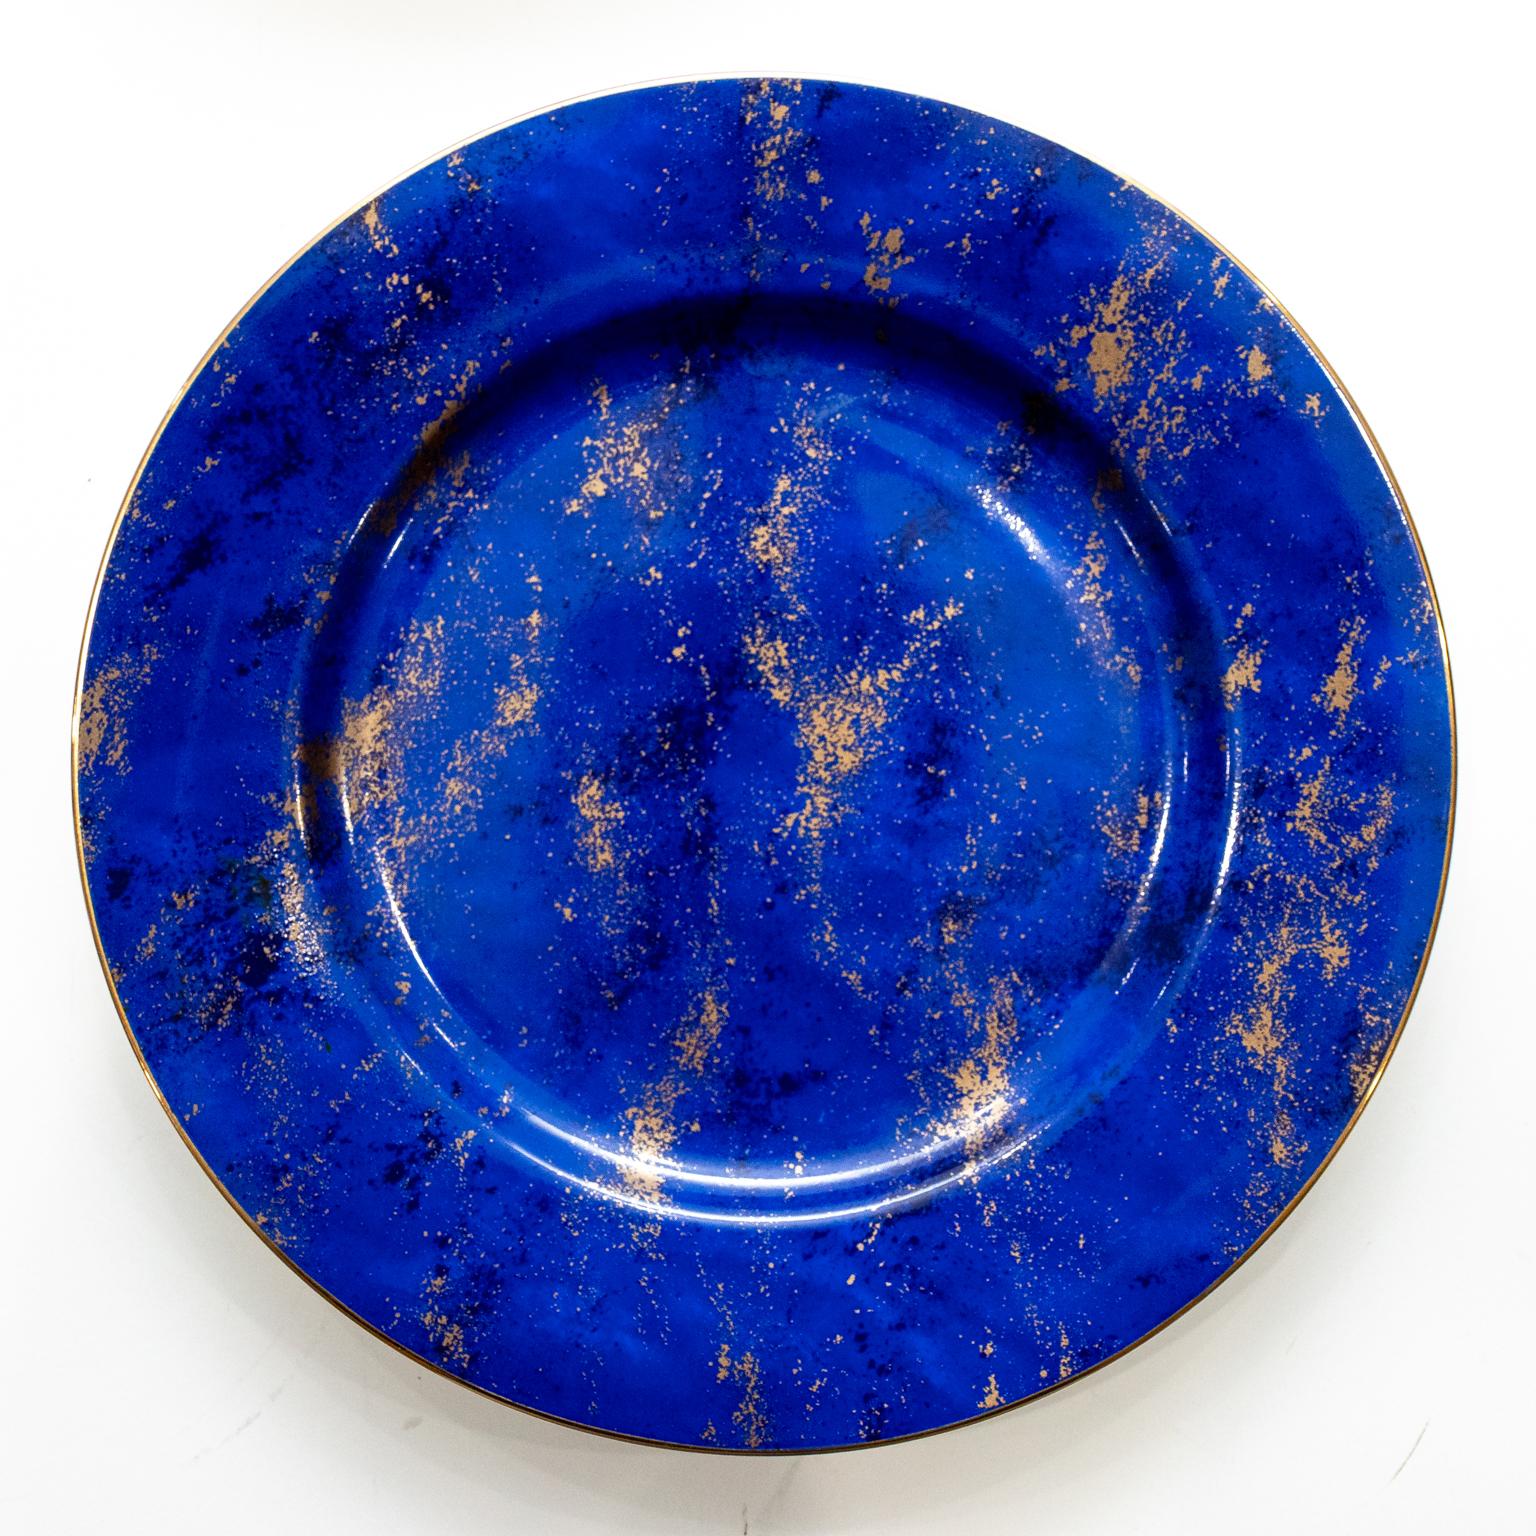 Circa mid-20th century Contemporary style set of ten Neiman Marcus vintage large blue chargers or dinner plates in porcelain with gold. Made in the United States. Please note of wear consistent with age. No chips and no knife marks.